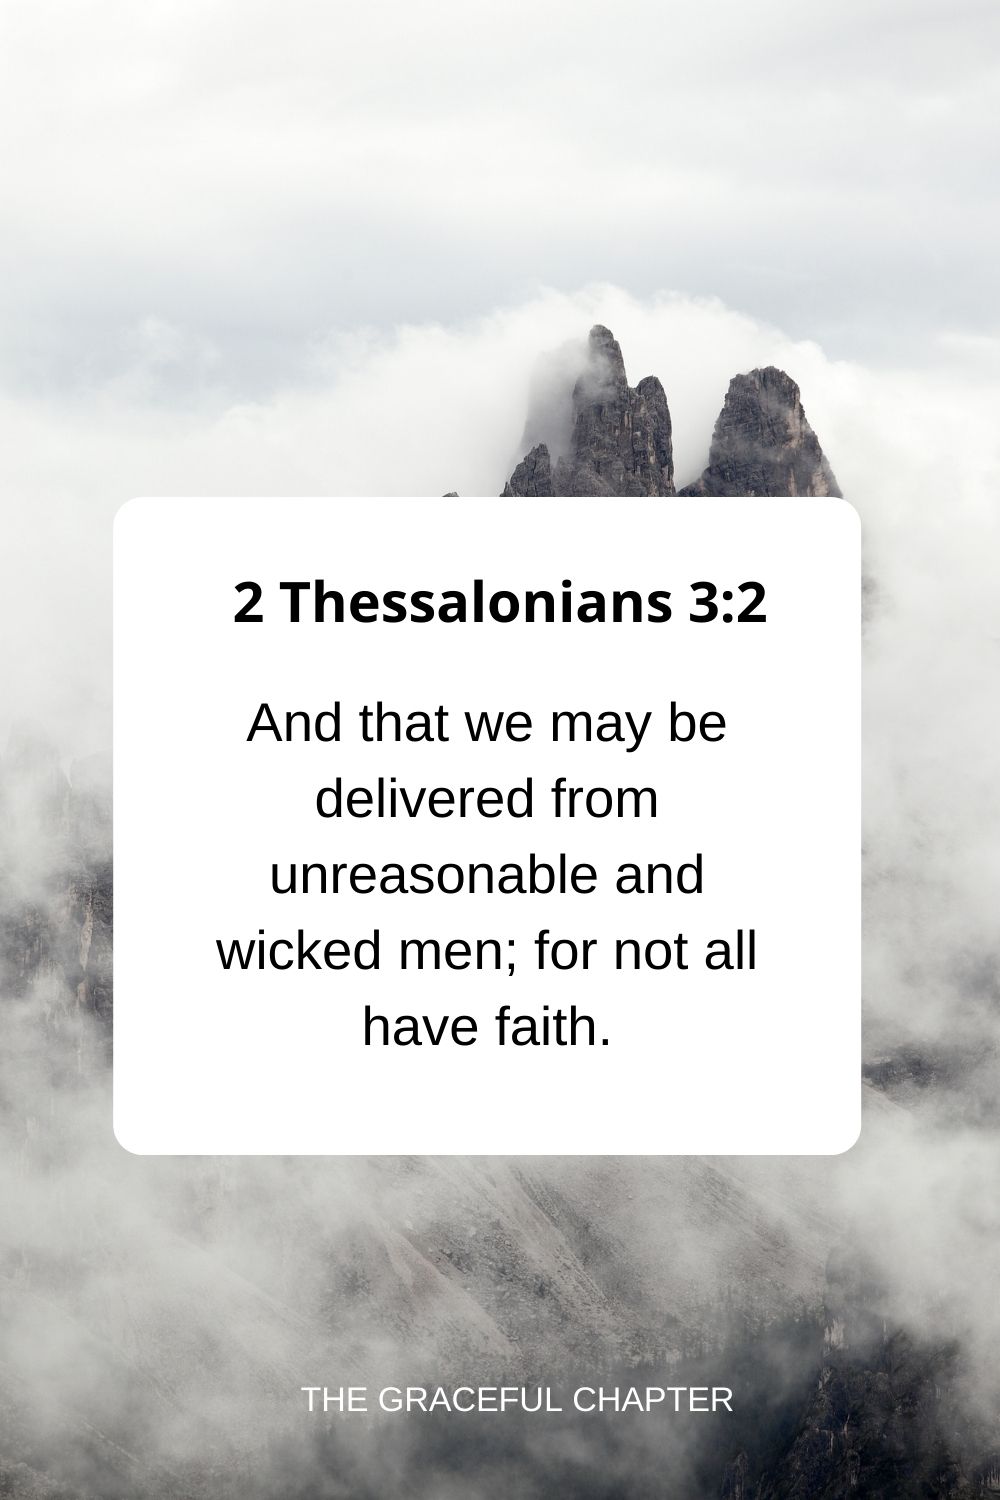 And that we may be delivered from unreasonable and wicked men; for not all have faith. 2 Thessalonians 3:2